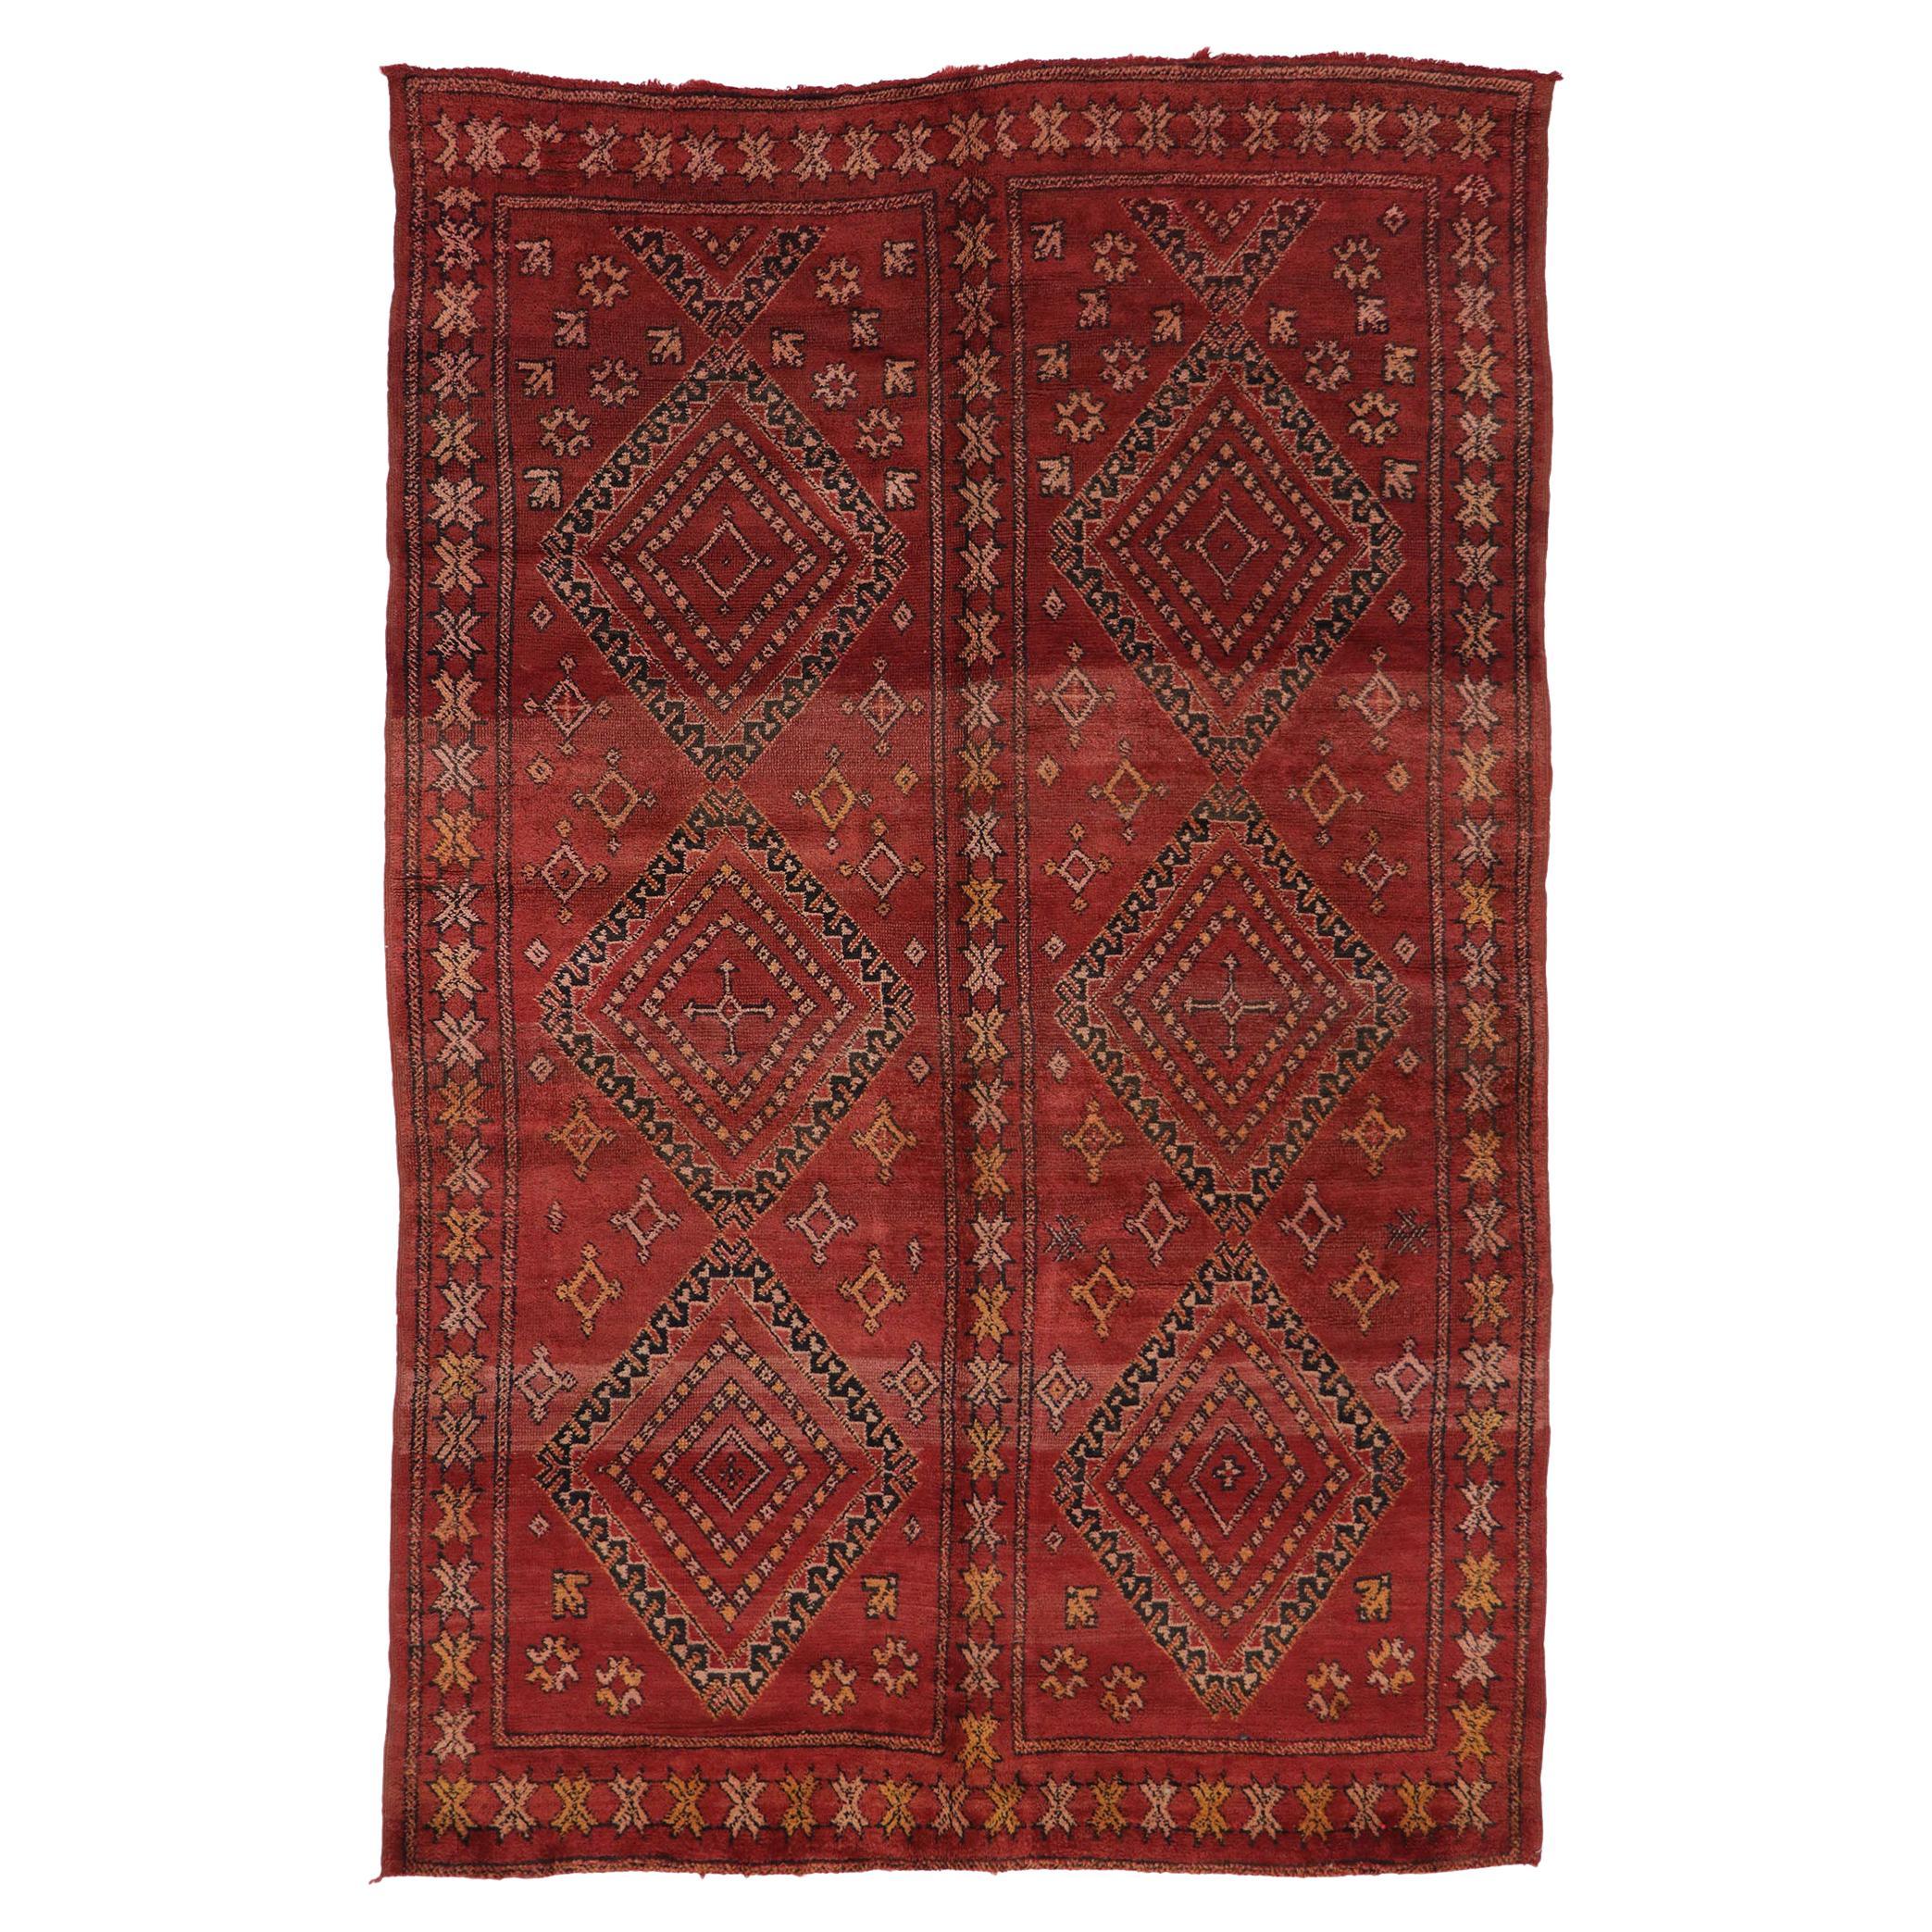 Vintage Berber Red Moroccan Rug with Tribal Style